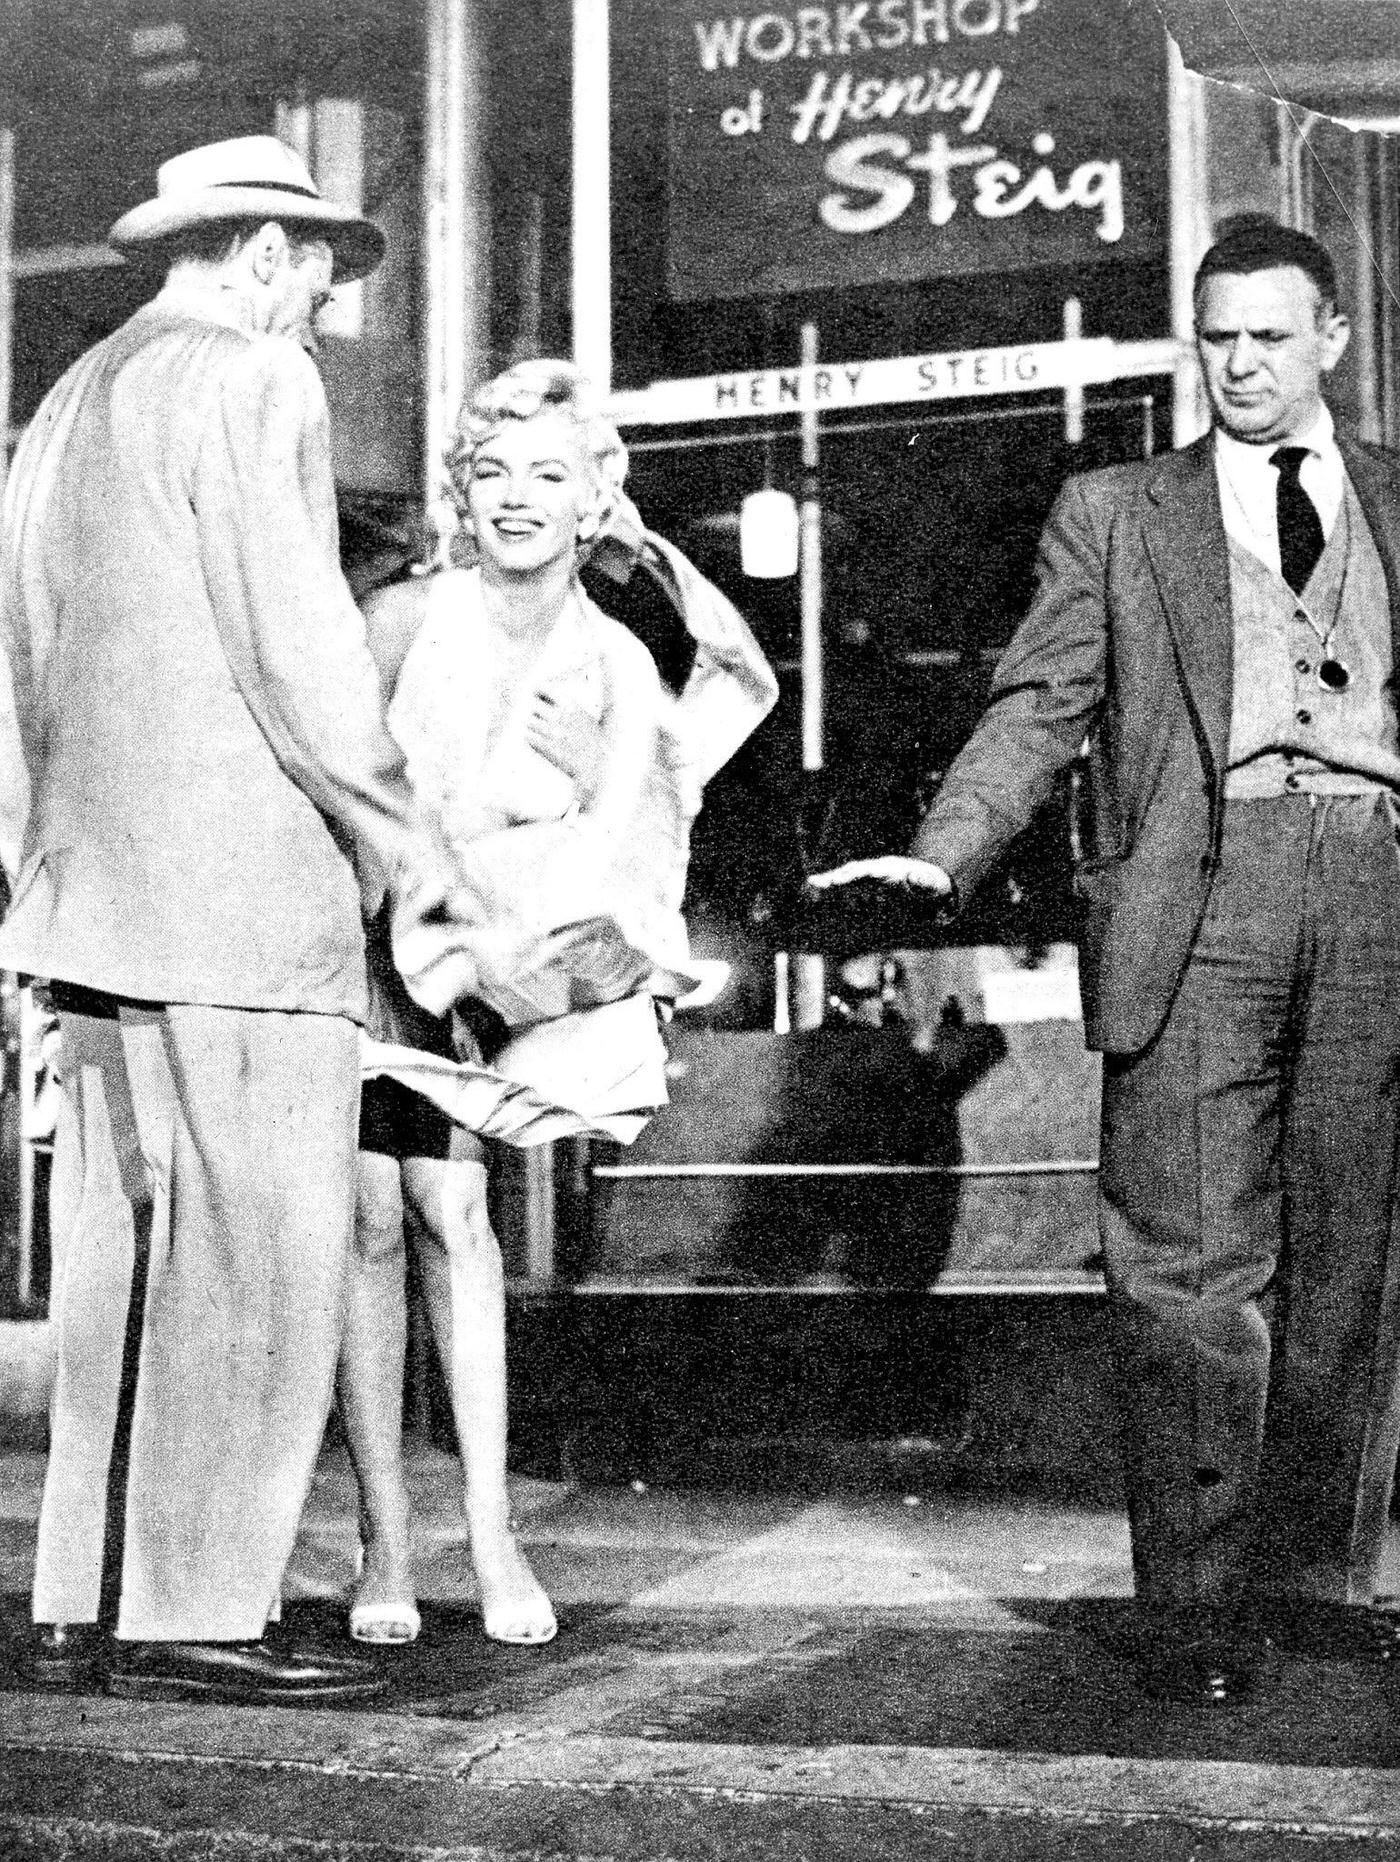 Marilyn Monroe with the skirt of her white dress blowing as she stands over a subway grate at the corner of 51st Street and Lexington Avenue with co-star Tom Ewell and cinematographer Milton Krasner in September, 1954